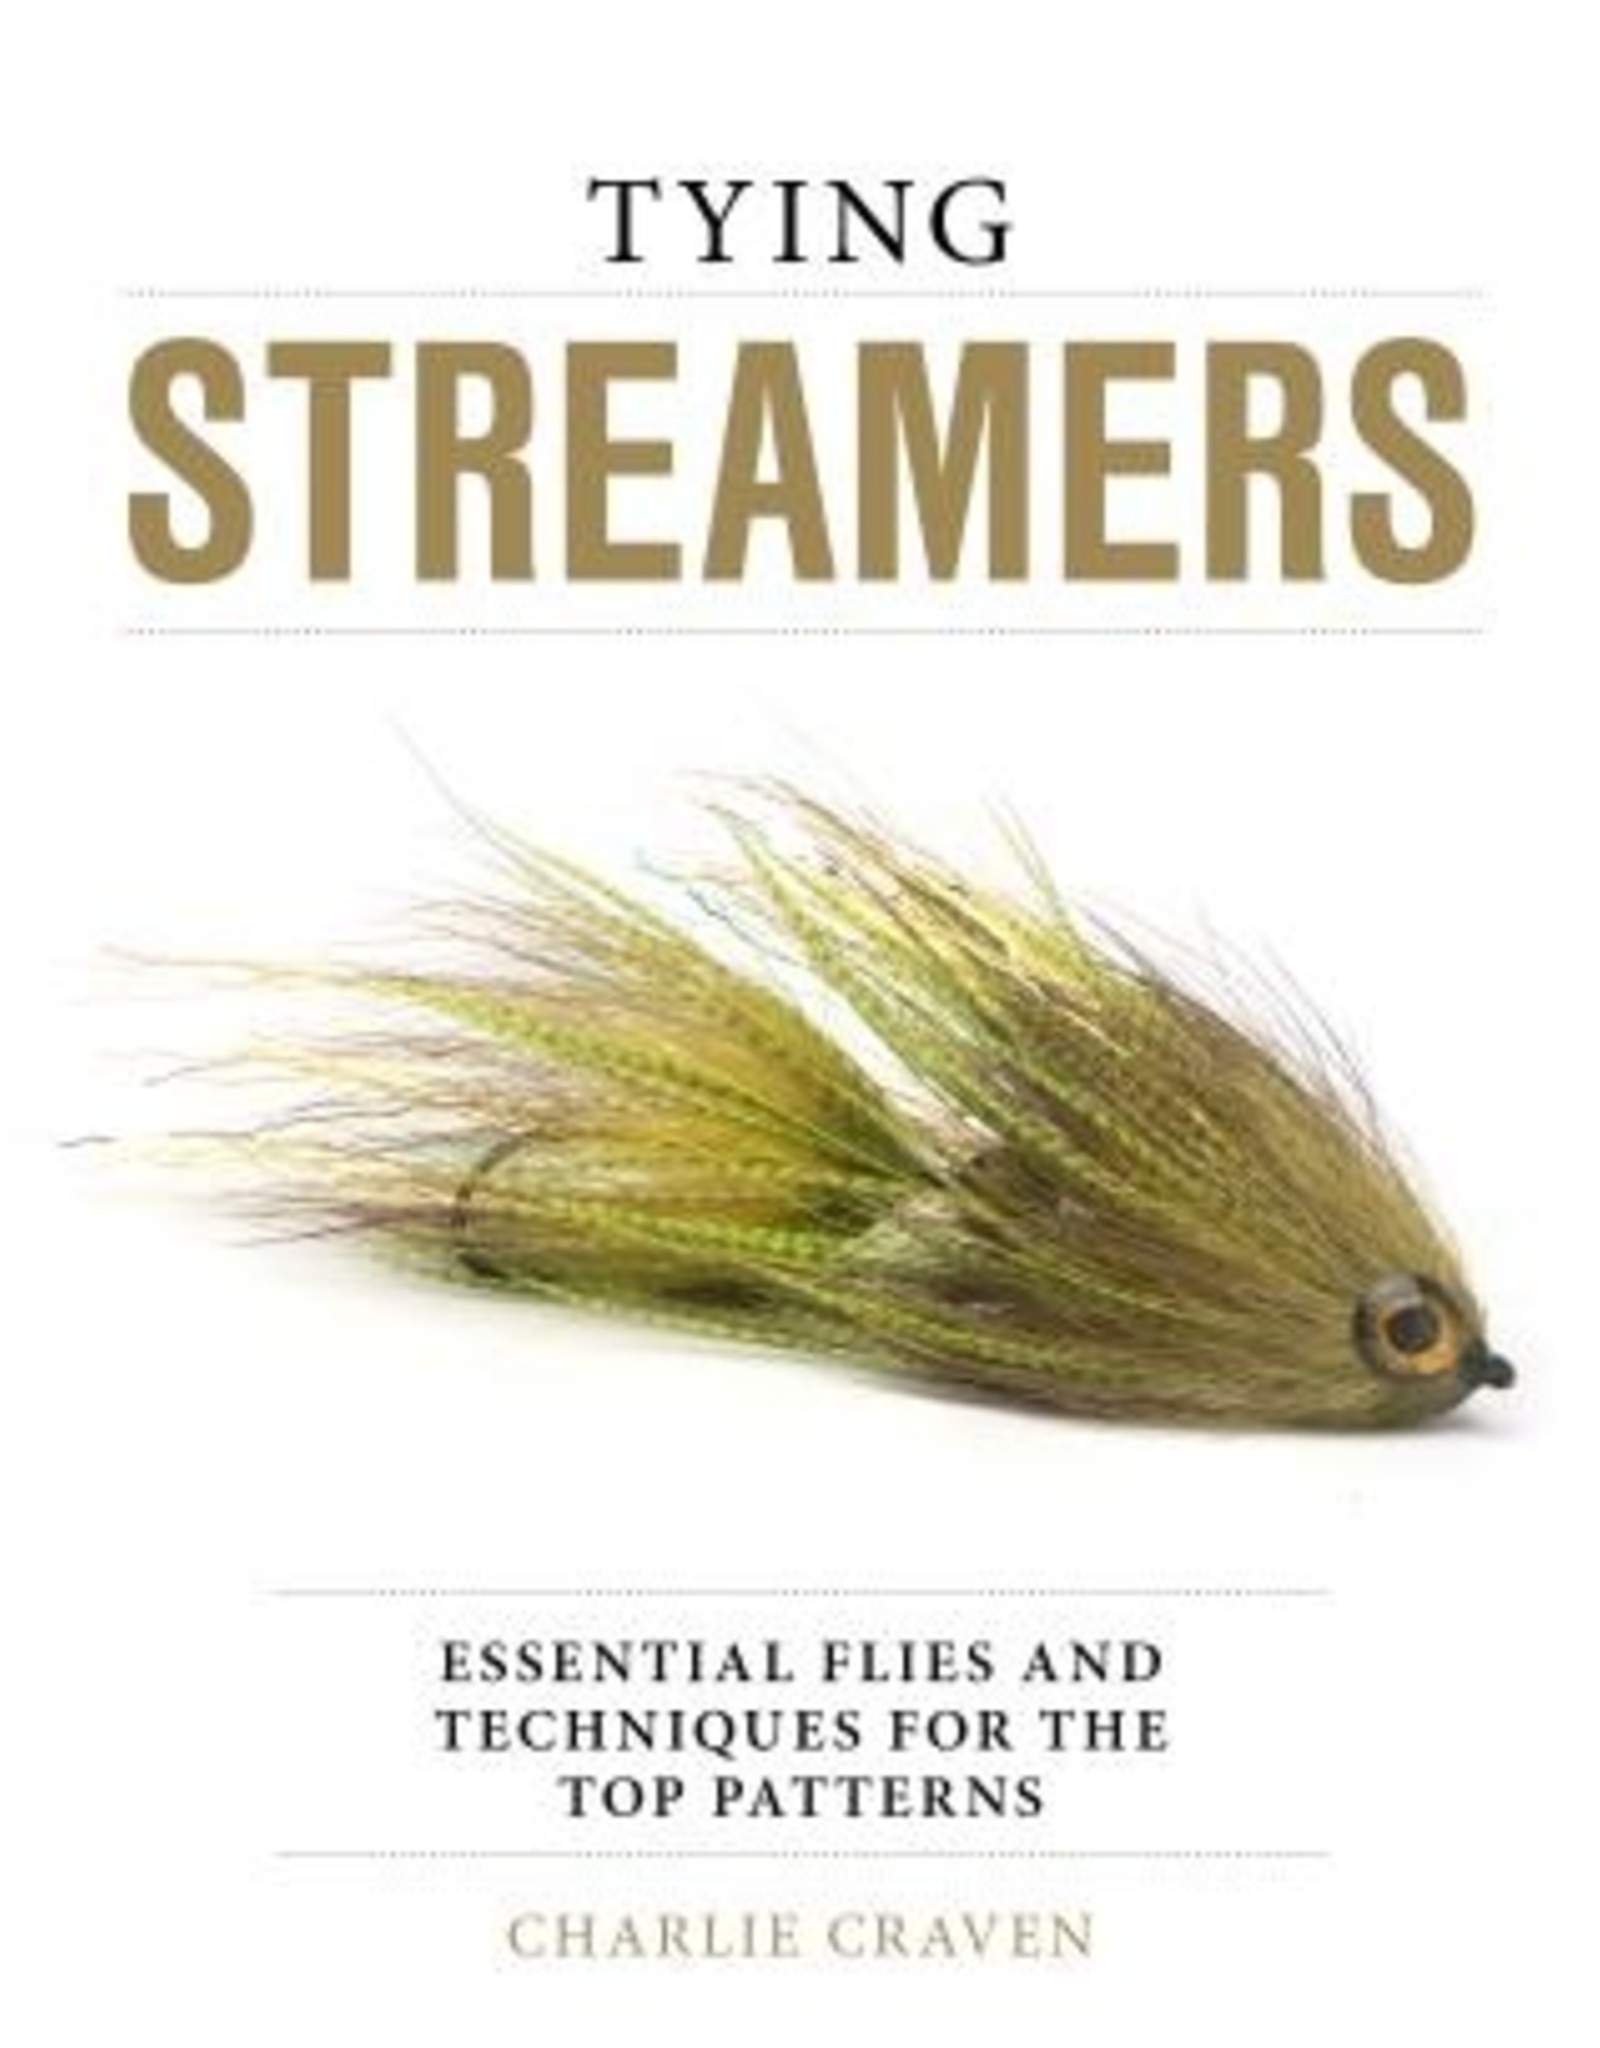 Tying Streamers - Charlie Craven - Book